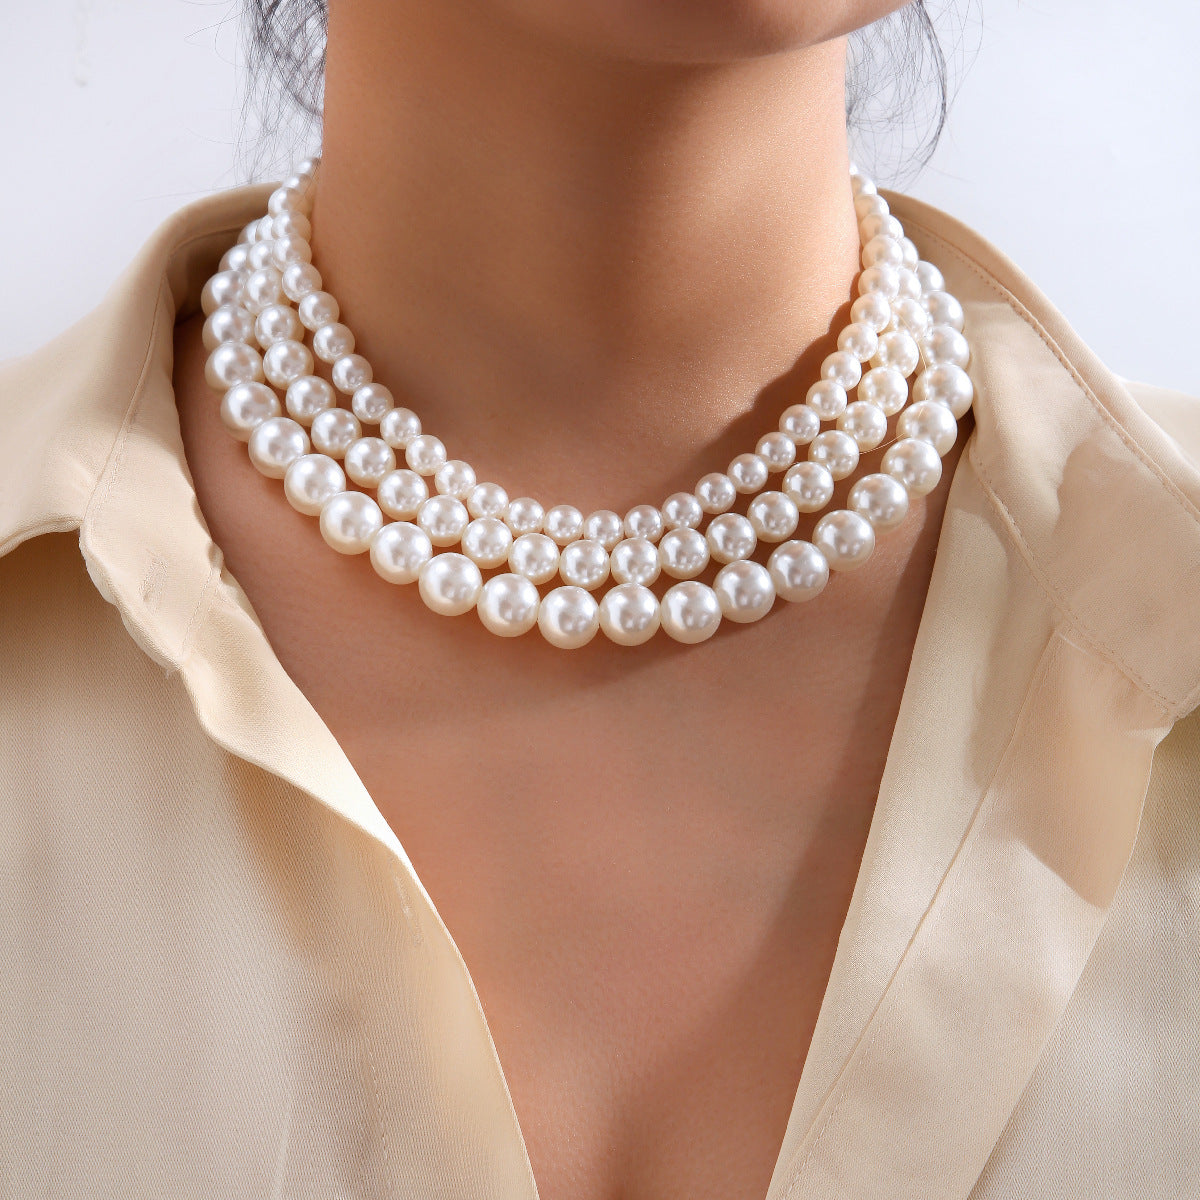 Set of 3 Elegant Imitation Pearl Clavicle Chains - Vintage Jewelry Accessories for Women